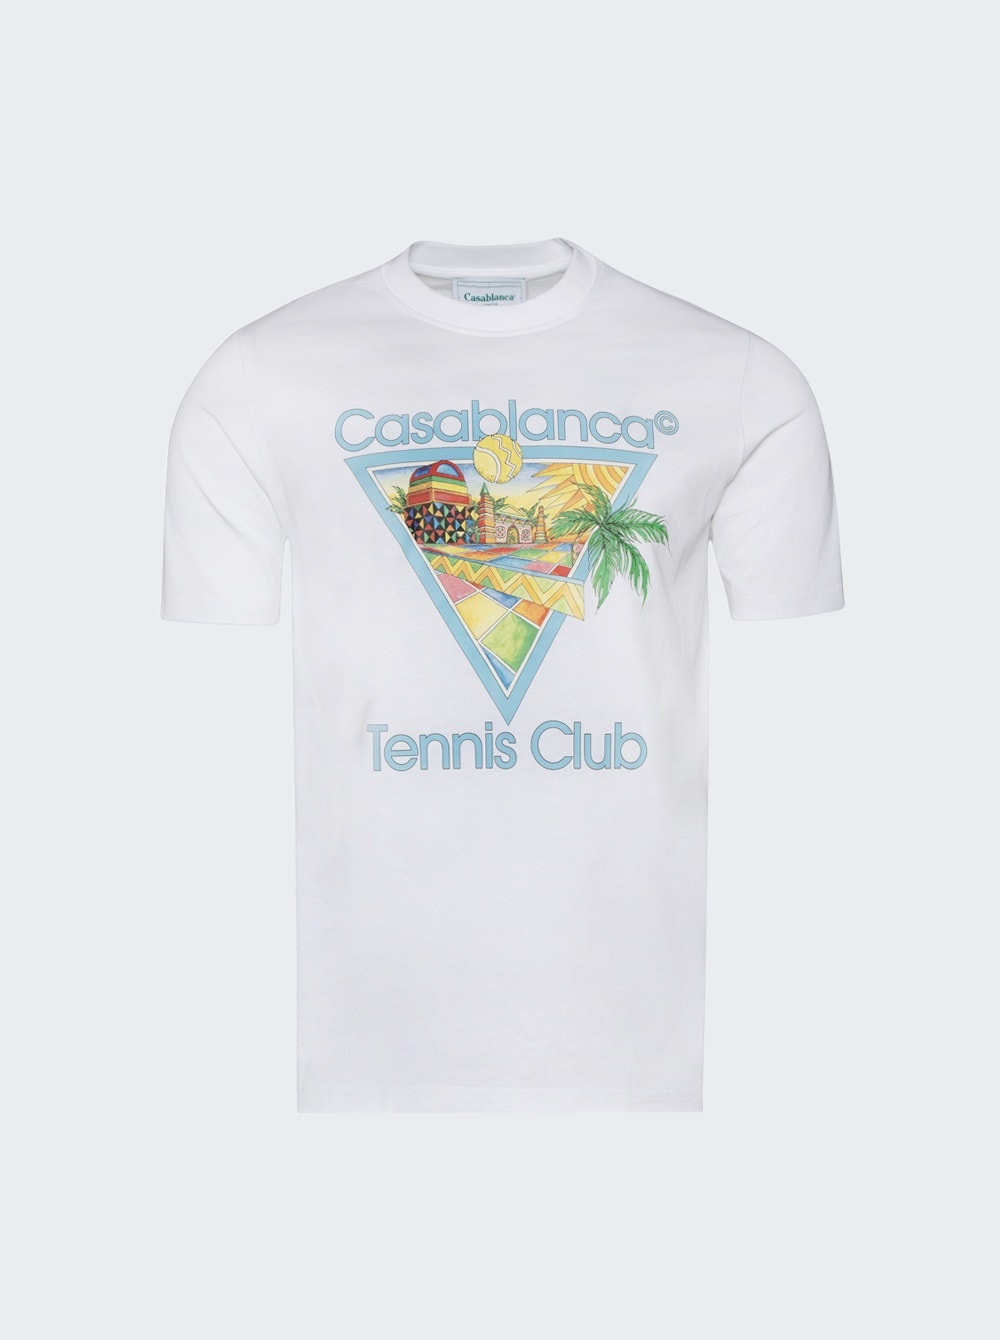 Afro Cubism Tennis Club Tee White - 1